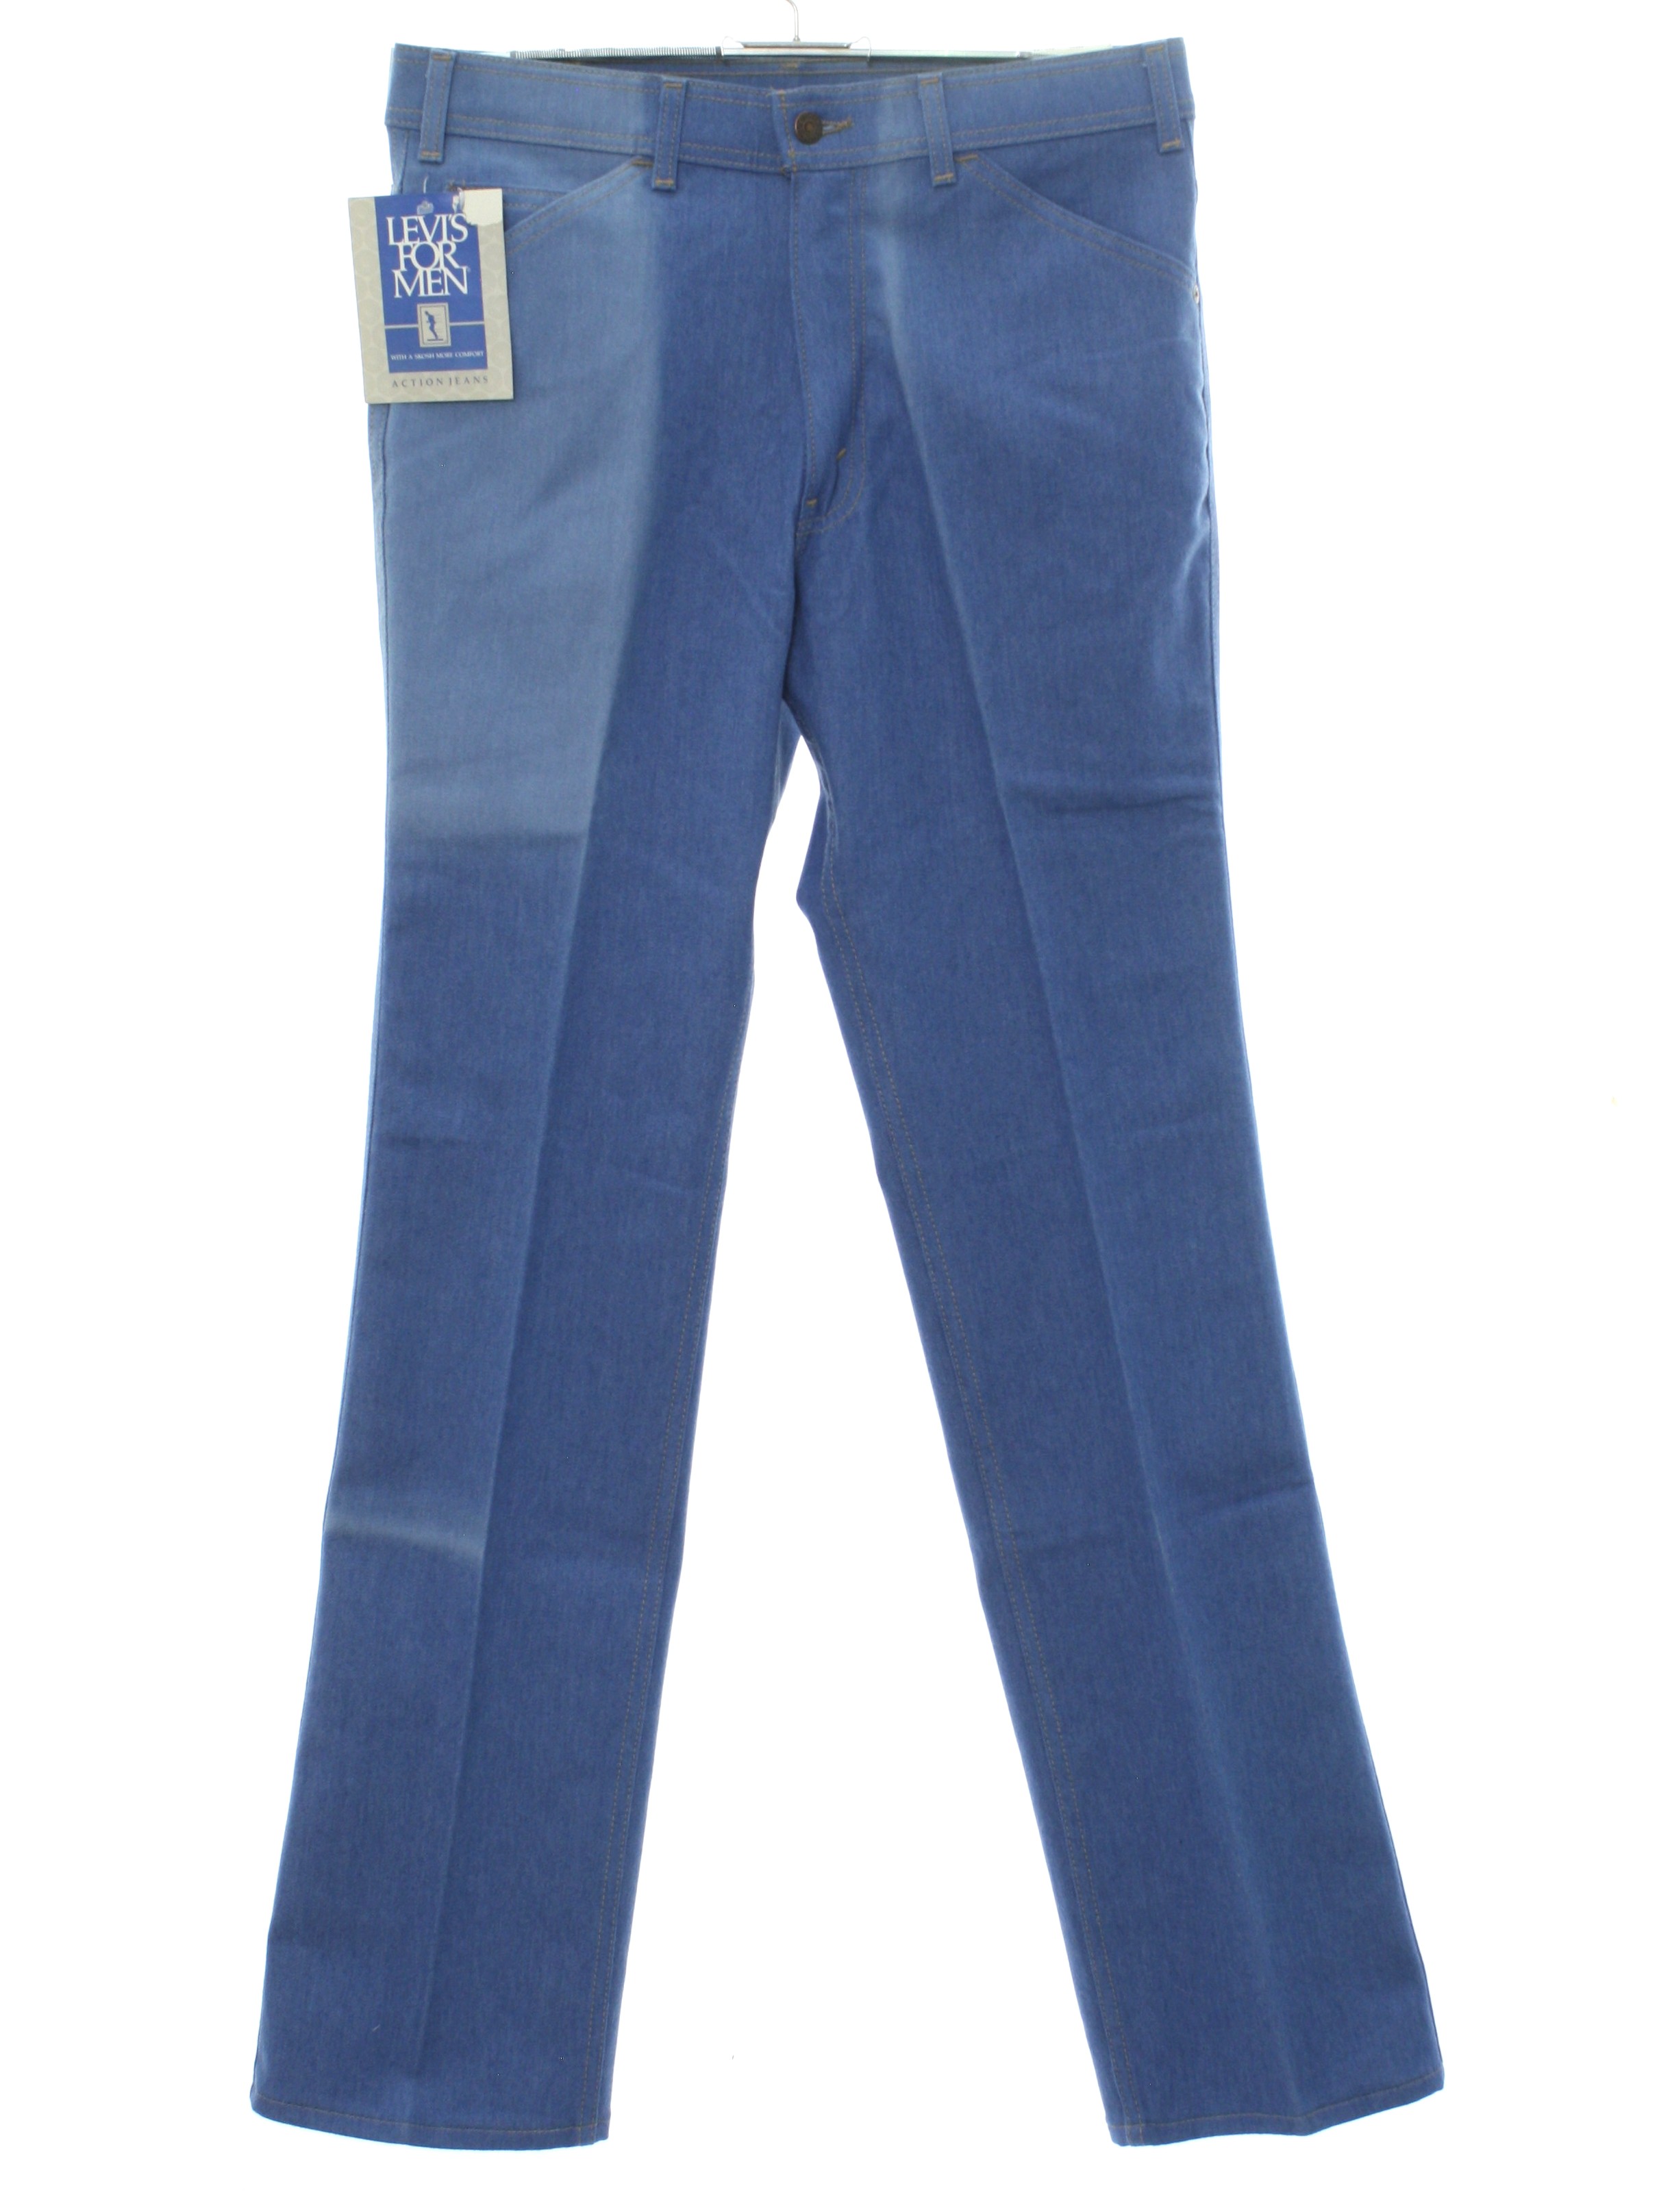 levi's flare jeans mens